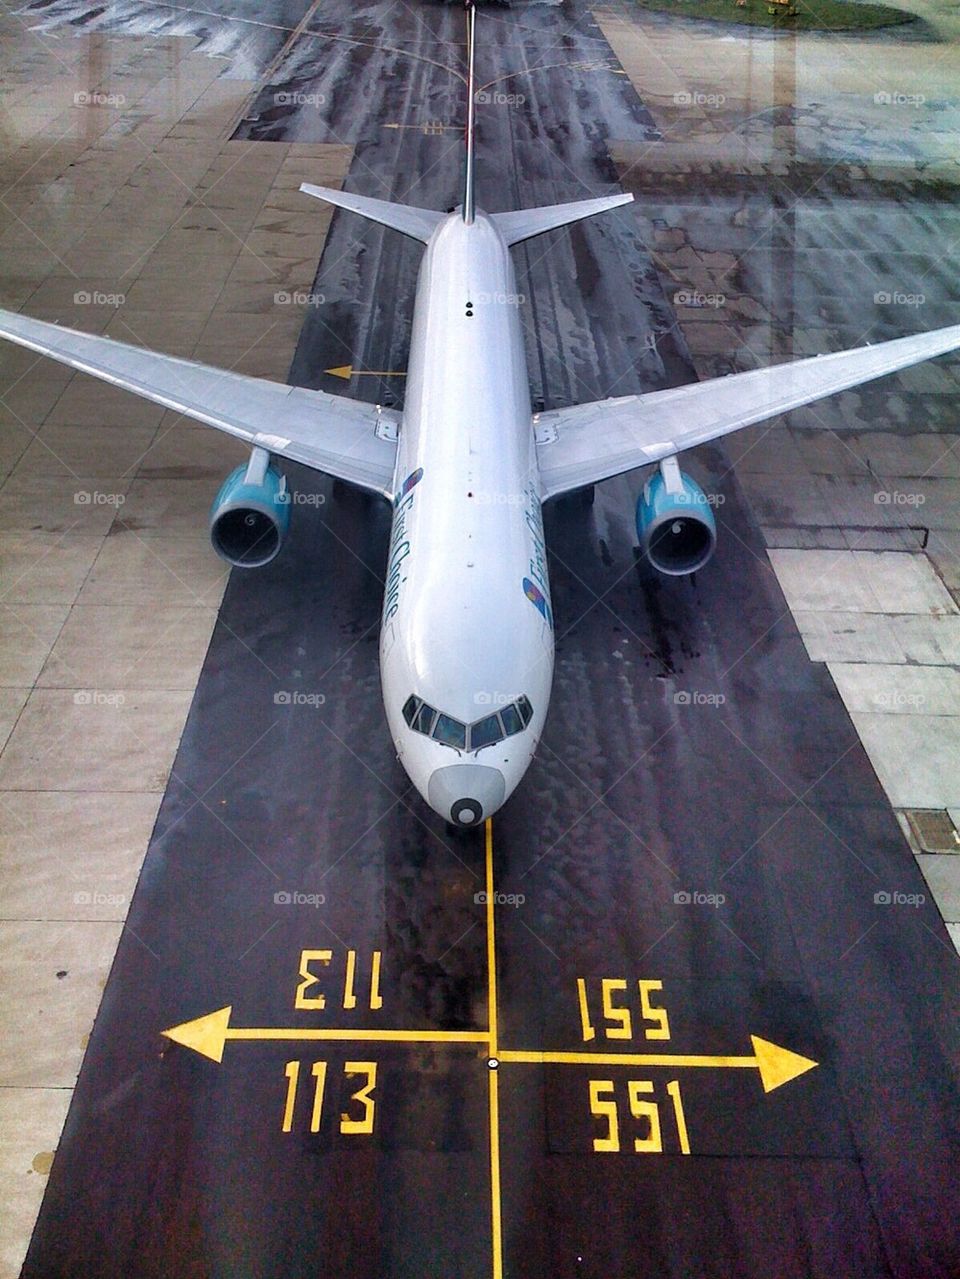 Plane from above 